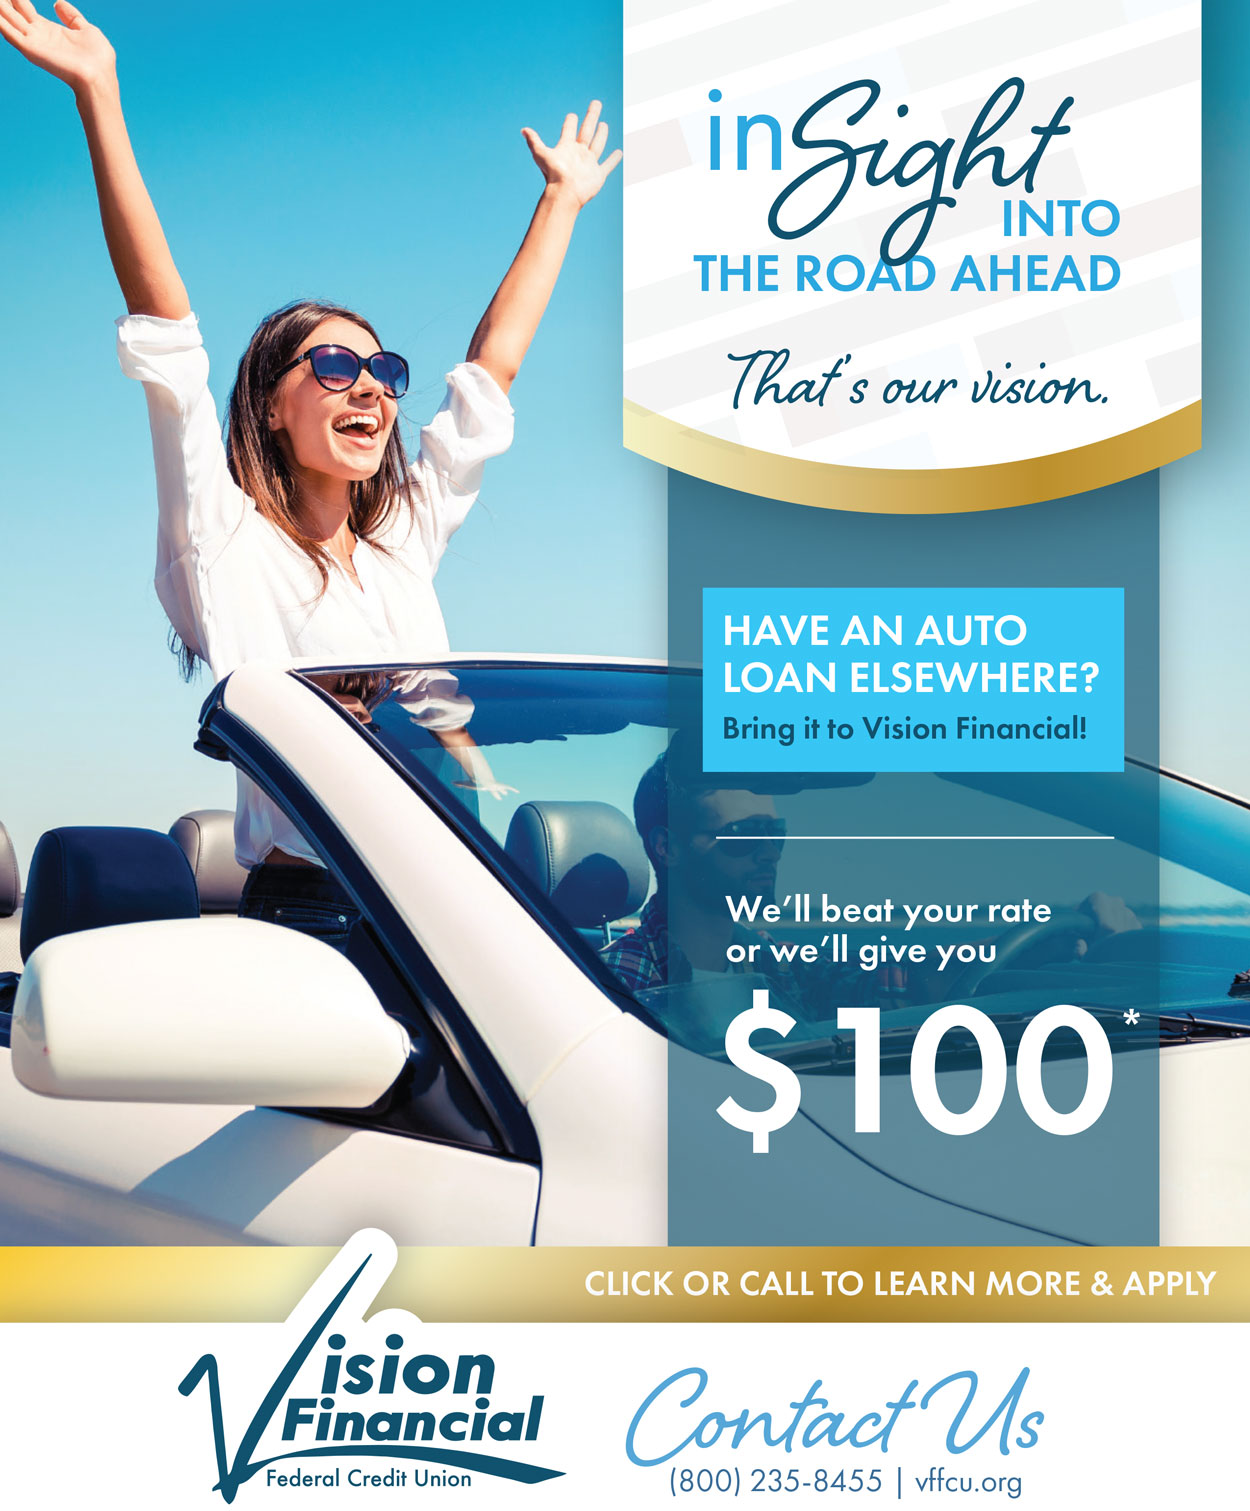 Have an auto loan elsewhere? Bring it to Vision. We'll beat te rate or give you $100